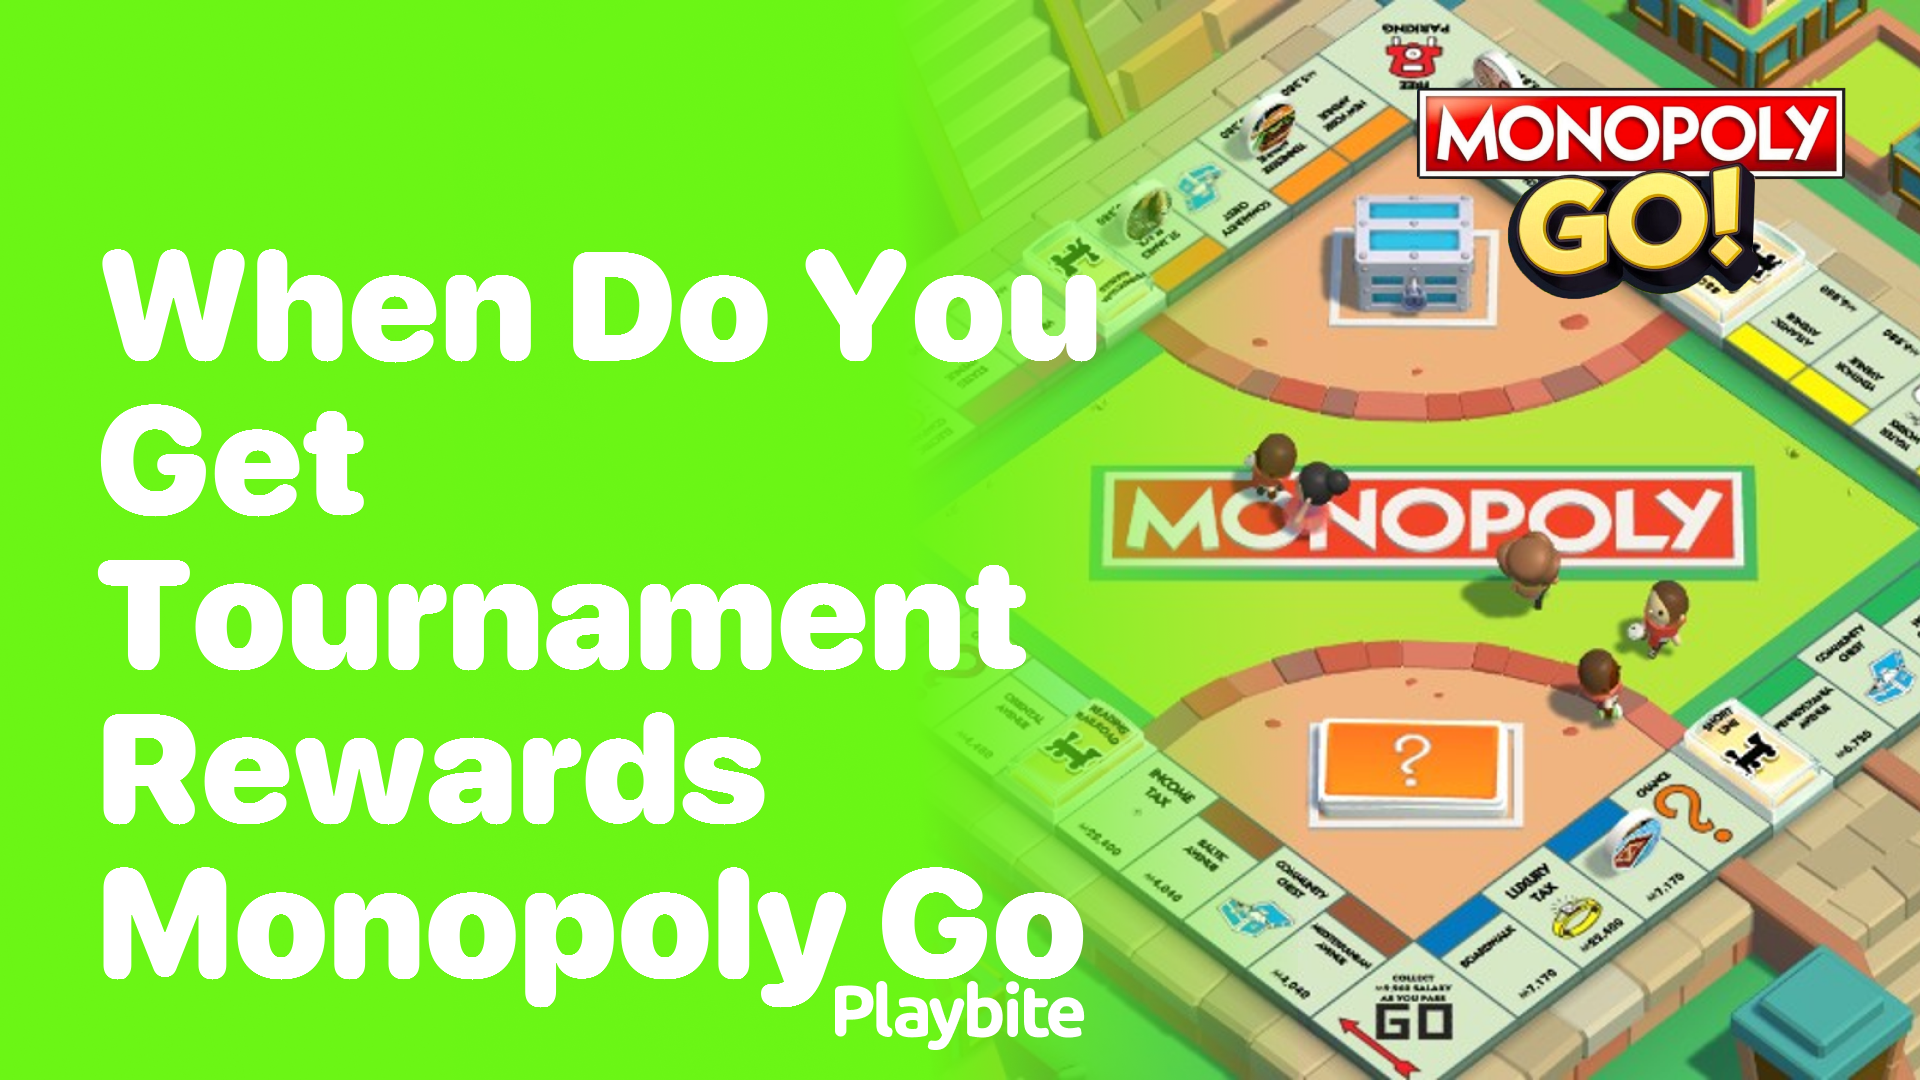 When Do You Get Tournament Rewards in Monopoly Go?